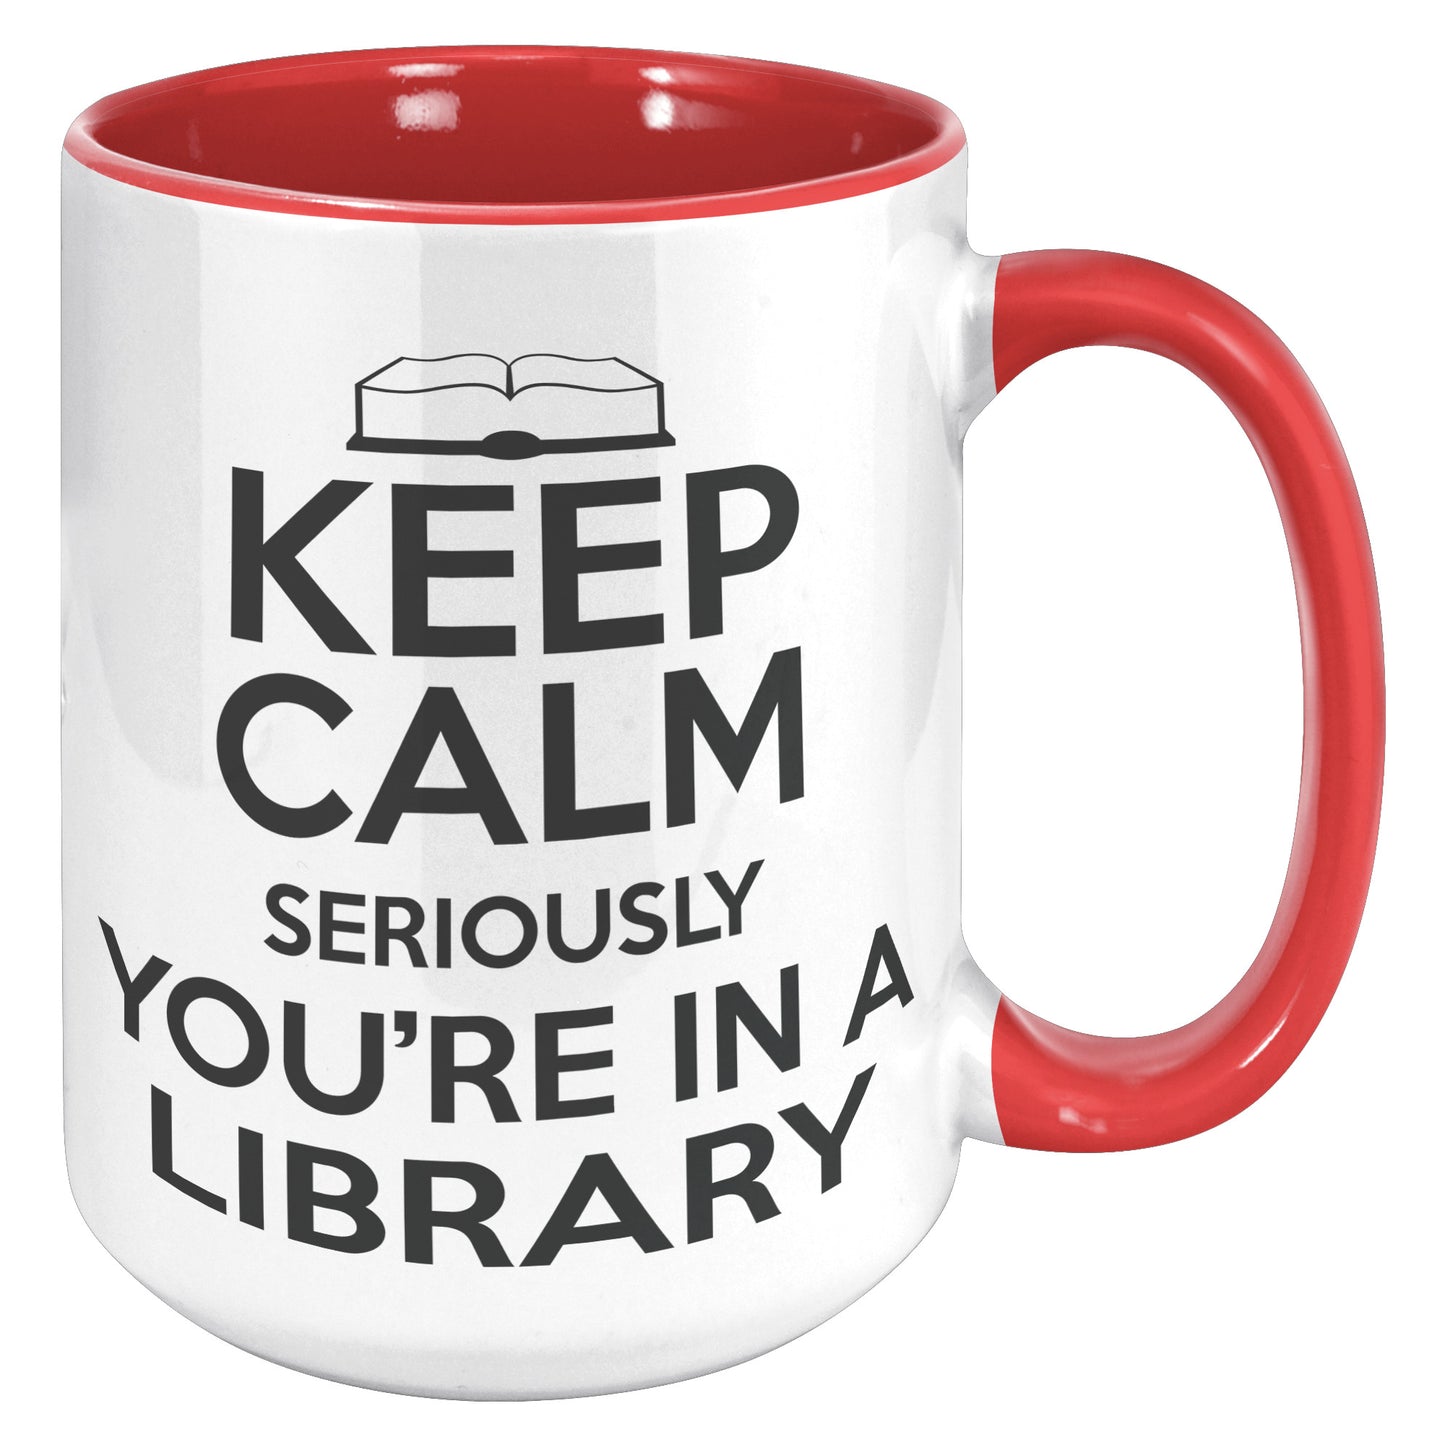 Keep Calm Seriously You're In A Library | Accent Mug